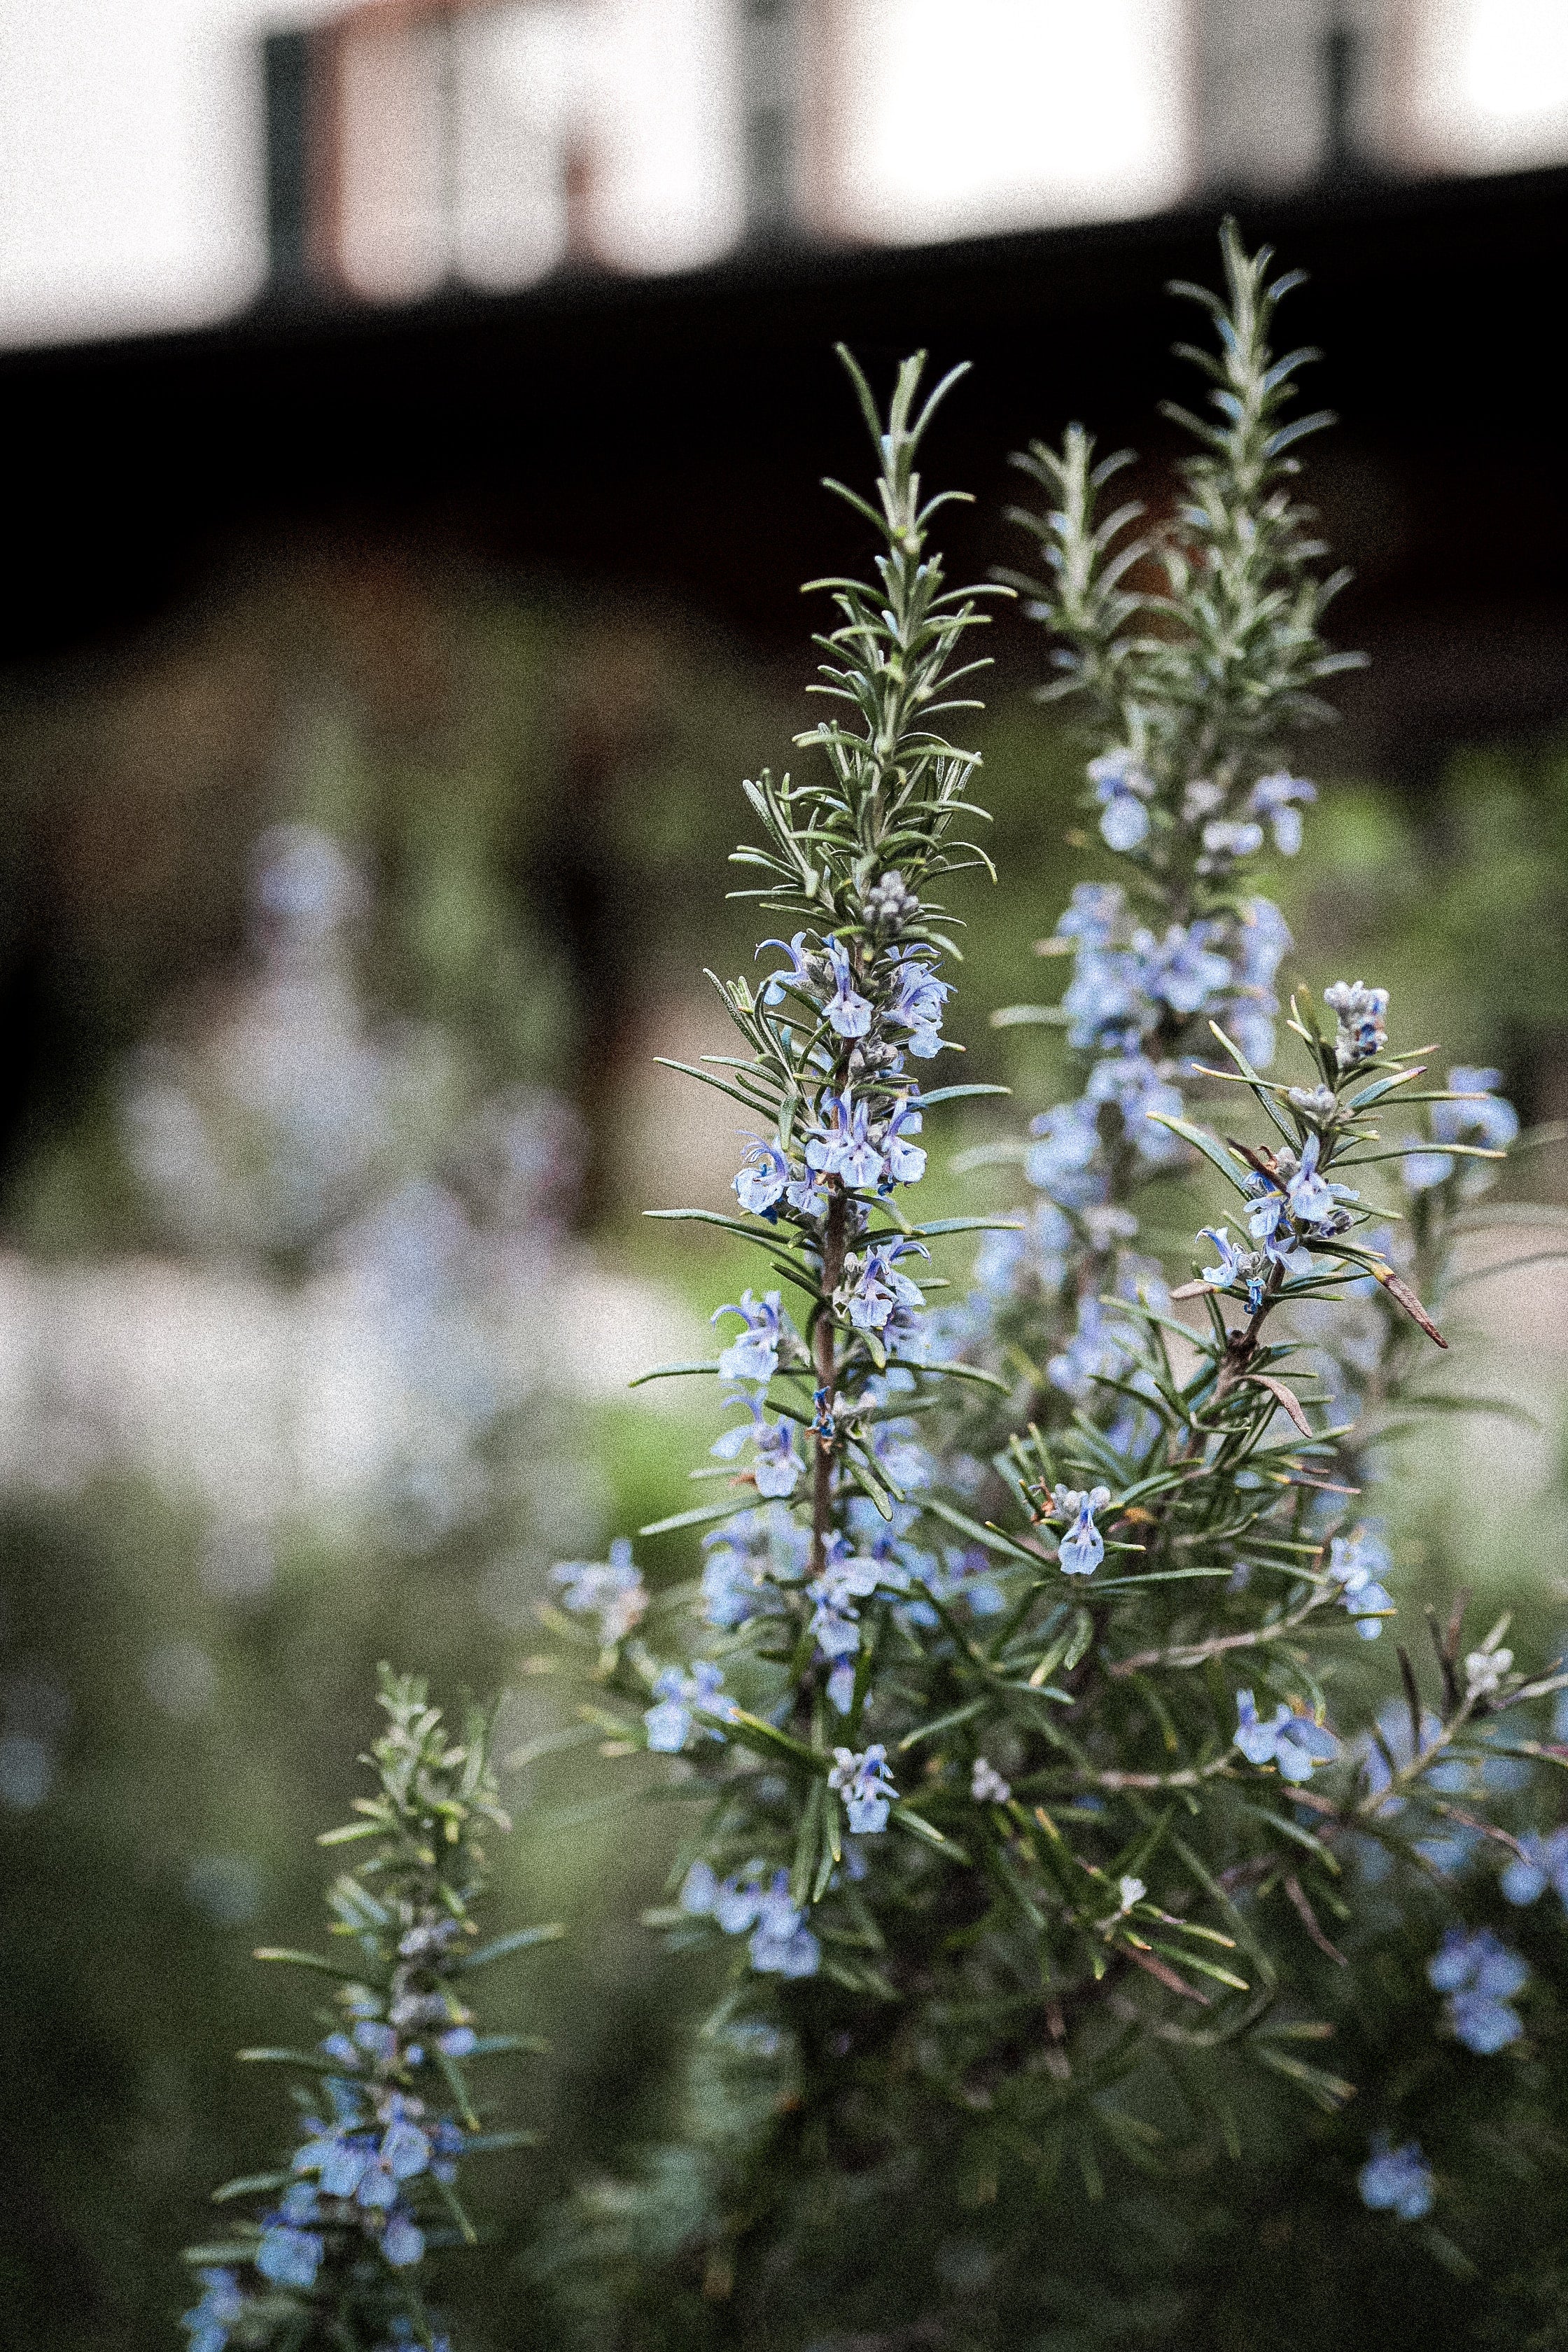 Rosemary with small flowers